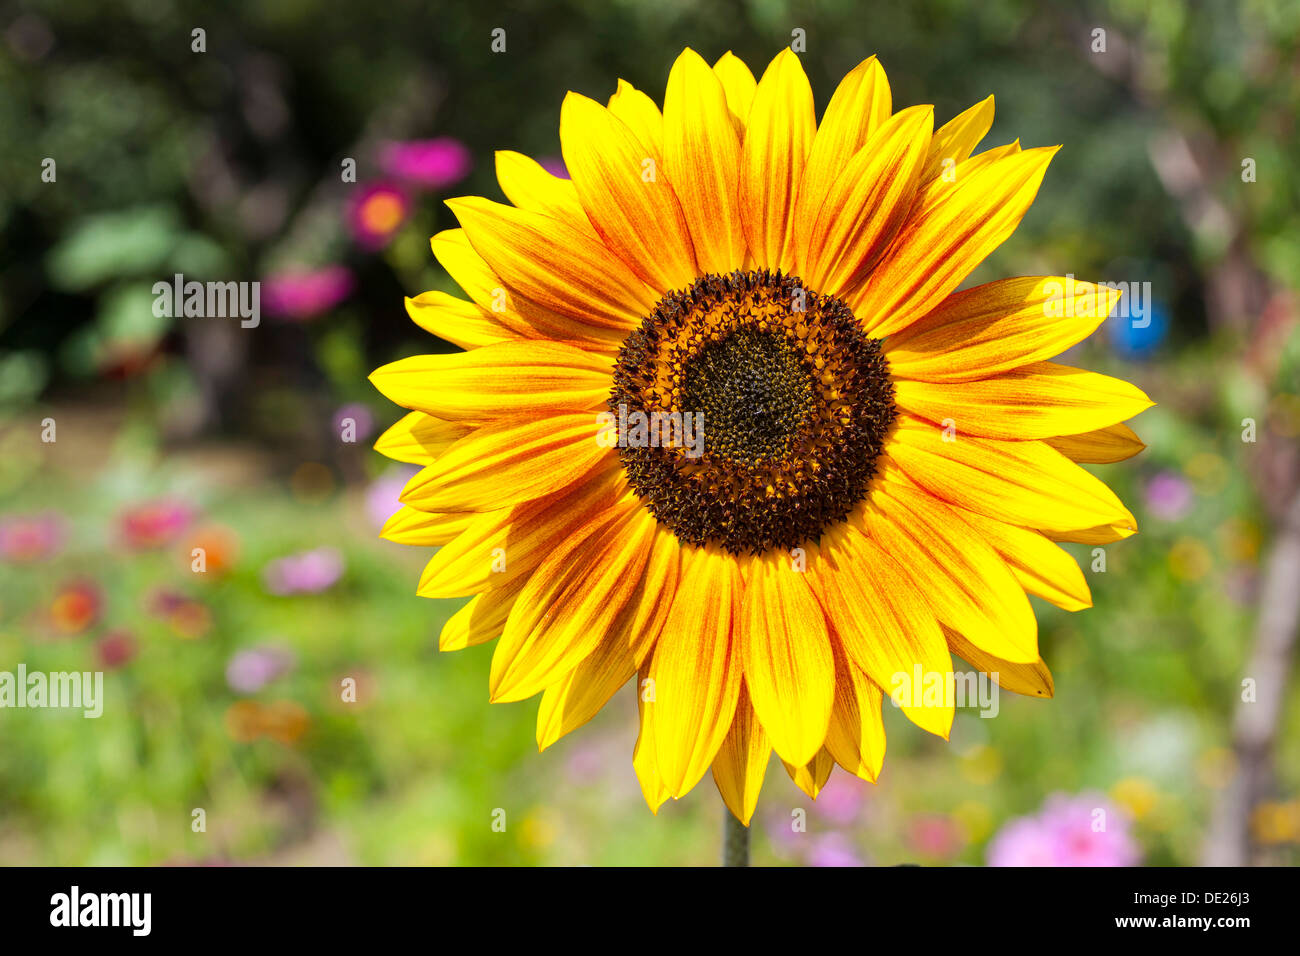 Inflorescence of a Sunflower (Helianthus annuus), petals and seed head, Germany Stock Photo